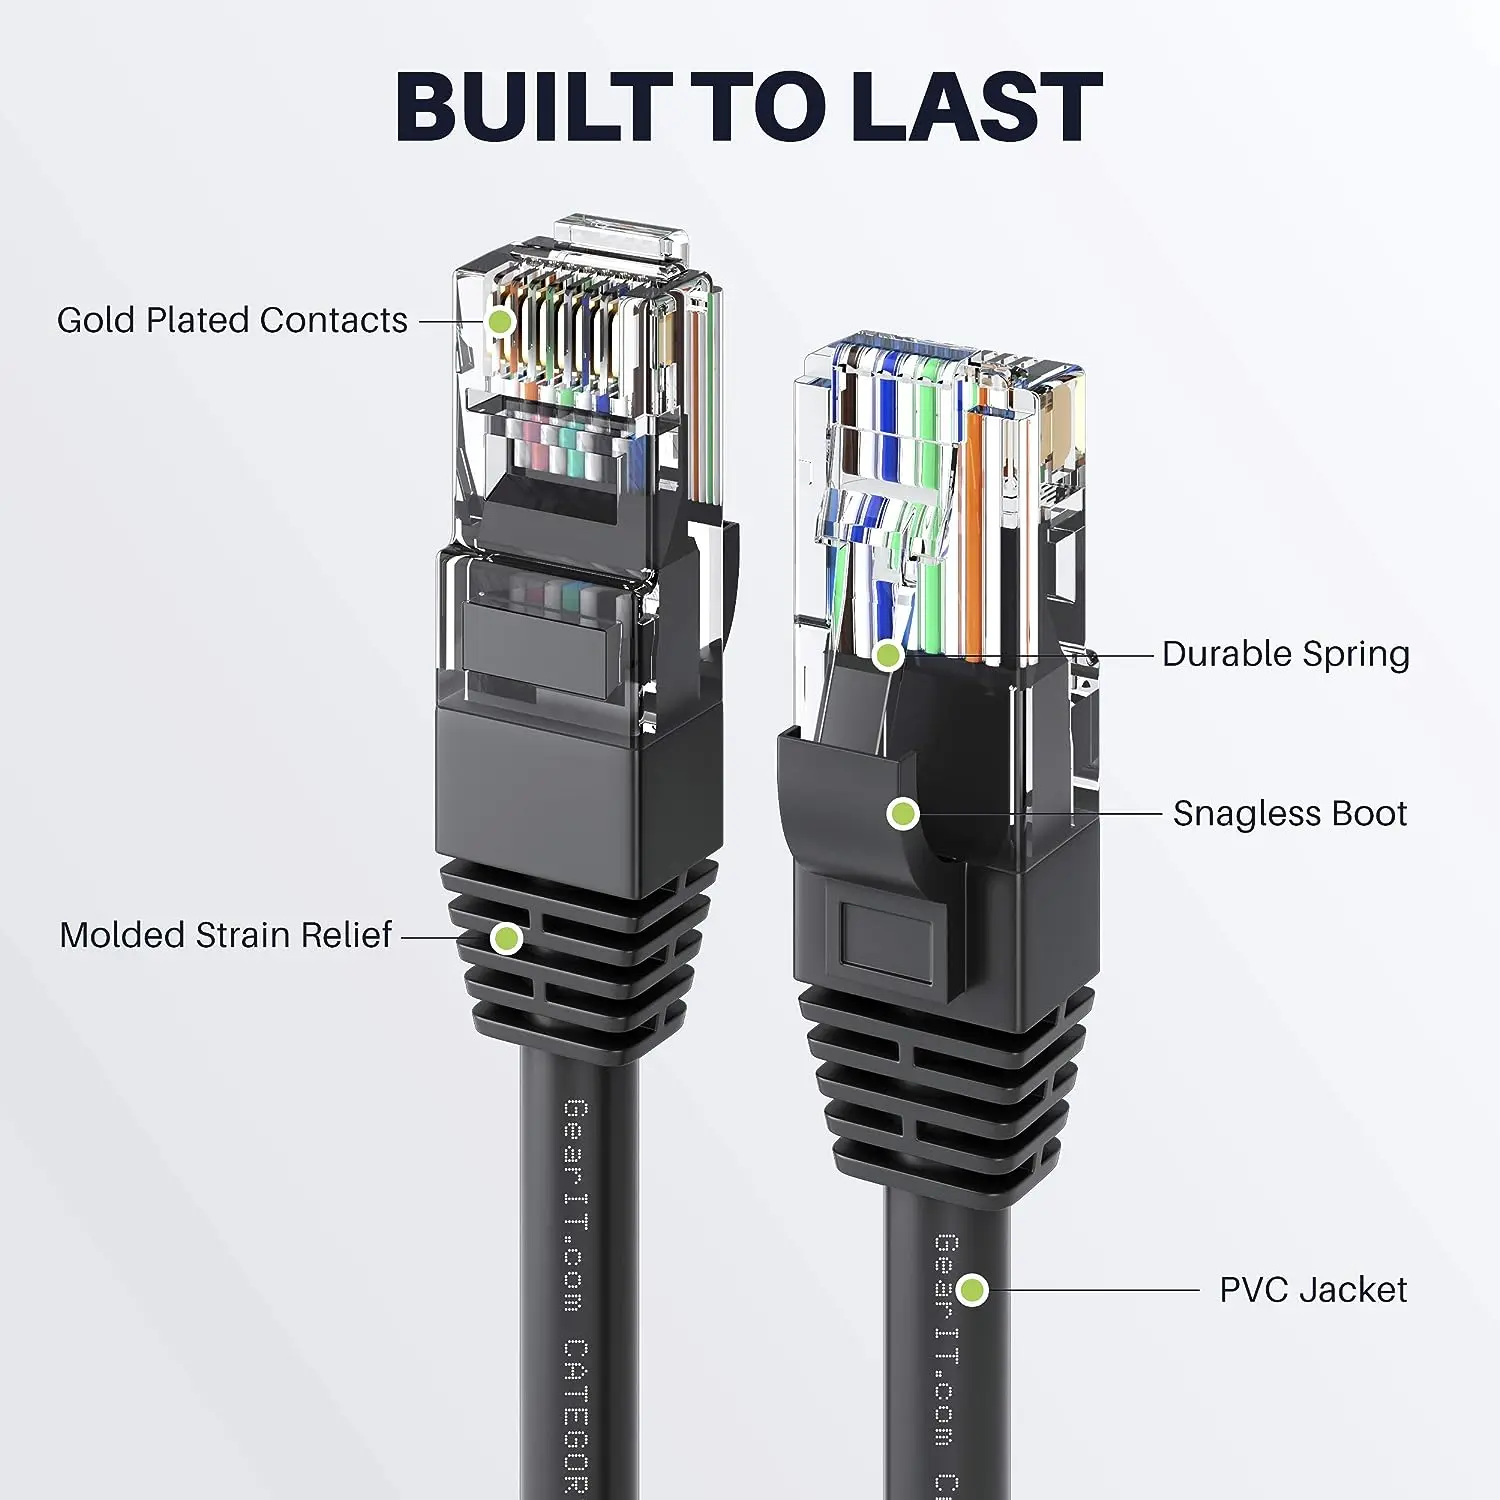 Cat 6 Ethernet Cable LAN Network Cord,Internet, Network Cable - Supports Cat6 Network Standar Gigabit high-speed Network Cable